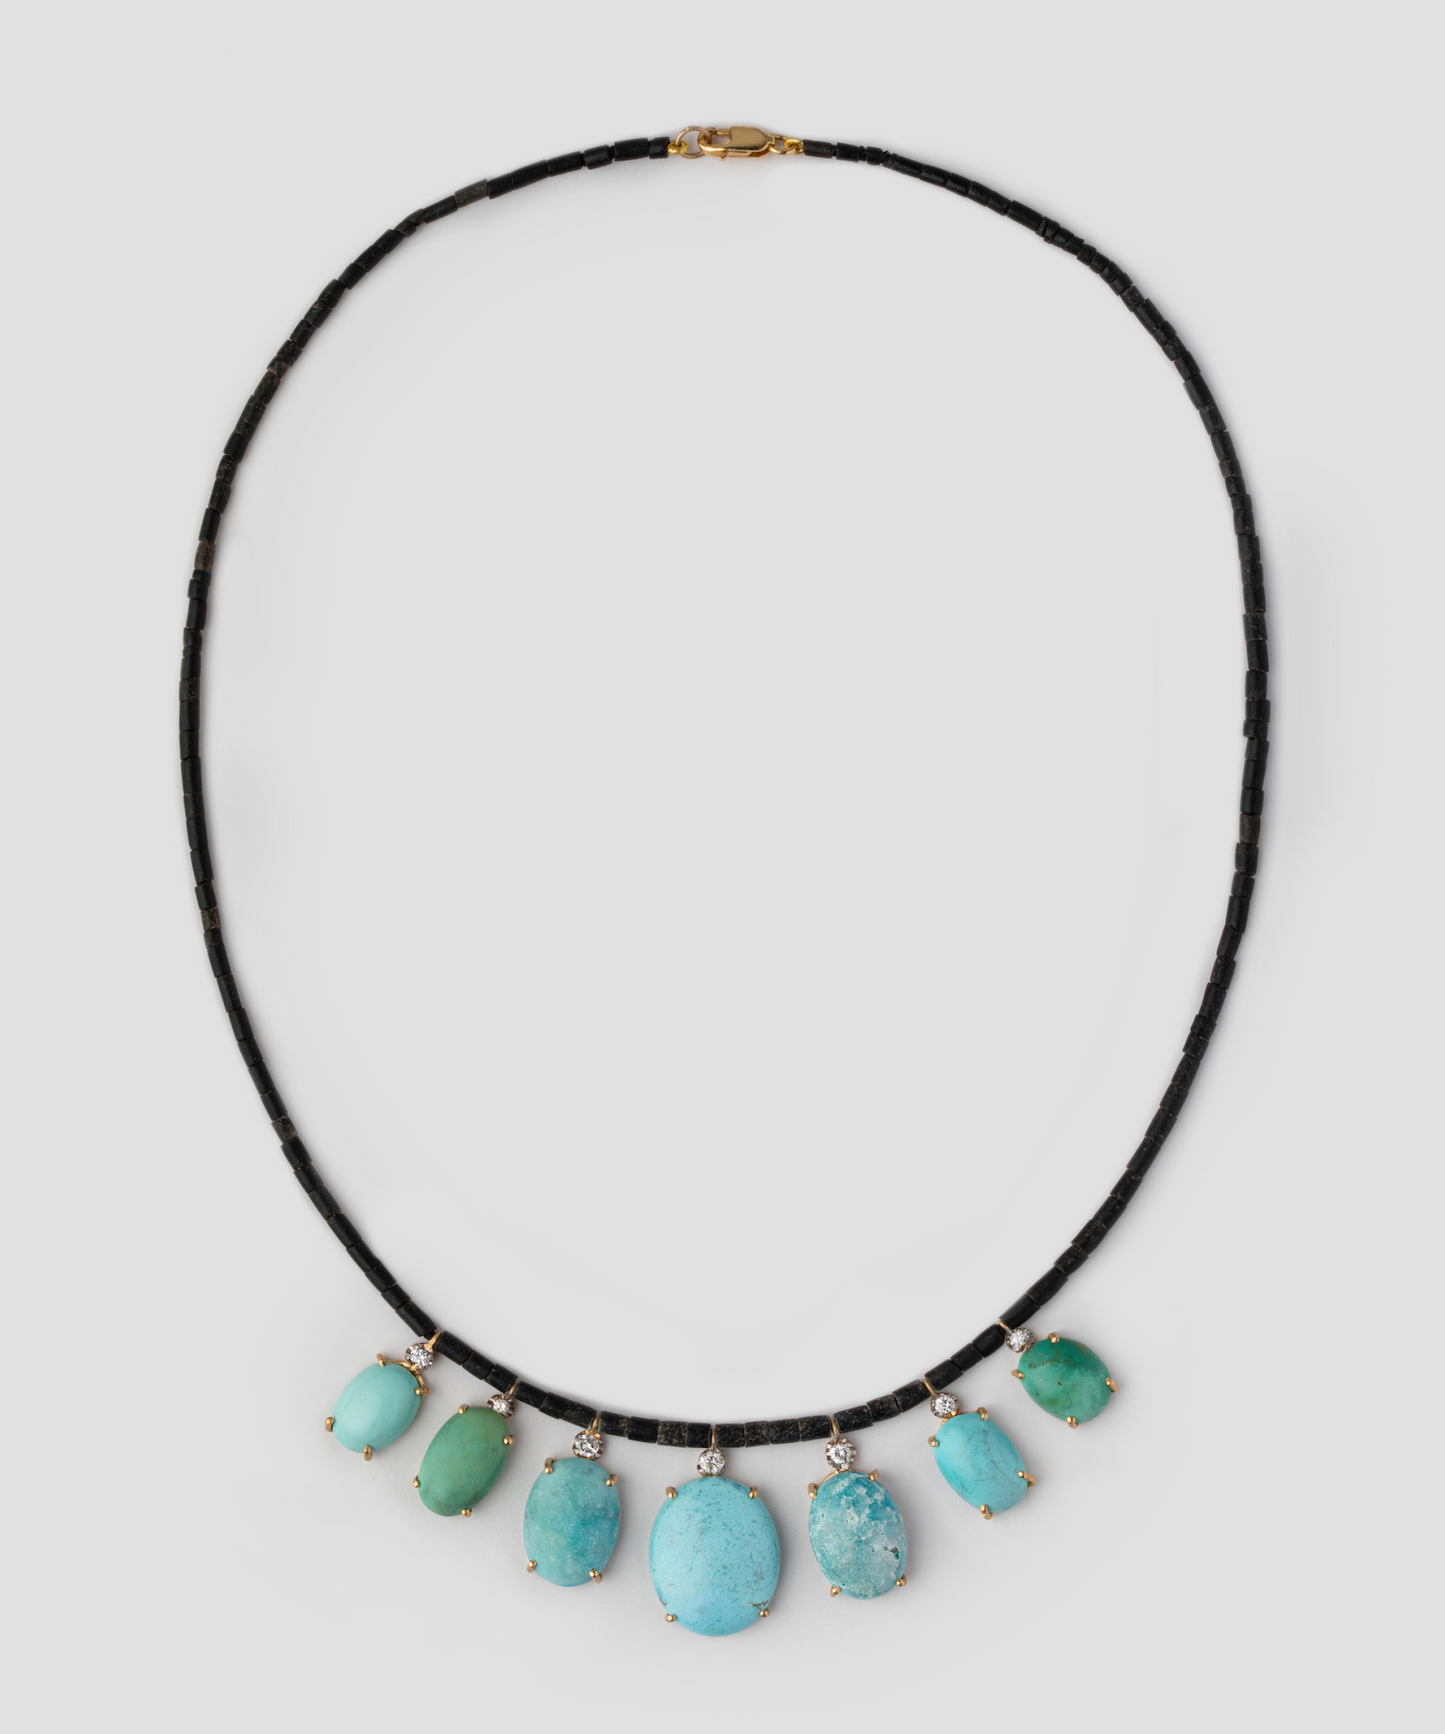 Black Jade Beads with Turquoise, Variscite and Diamonds